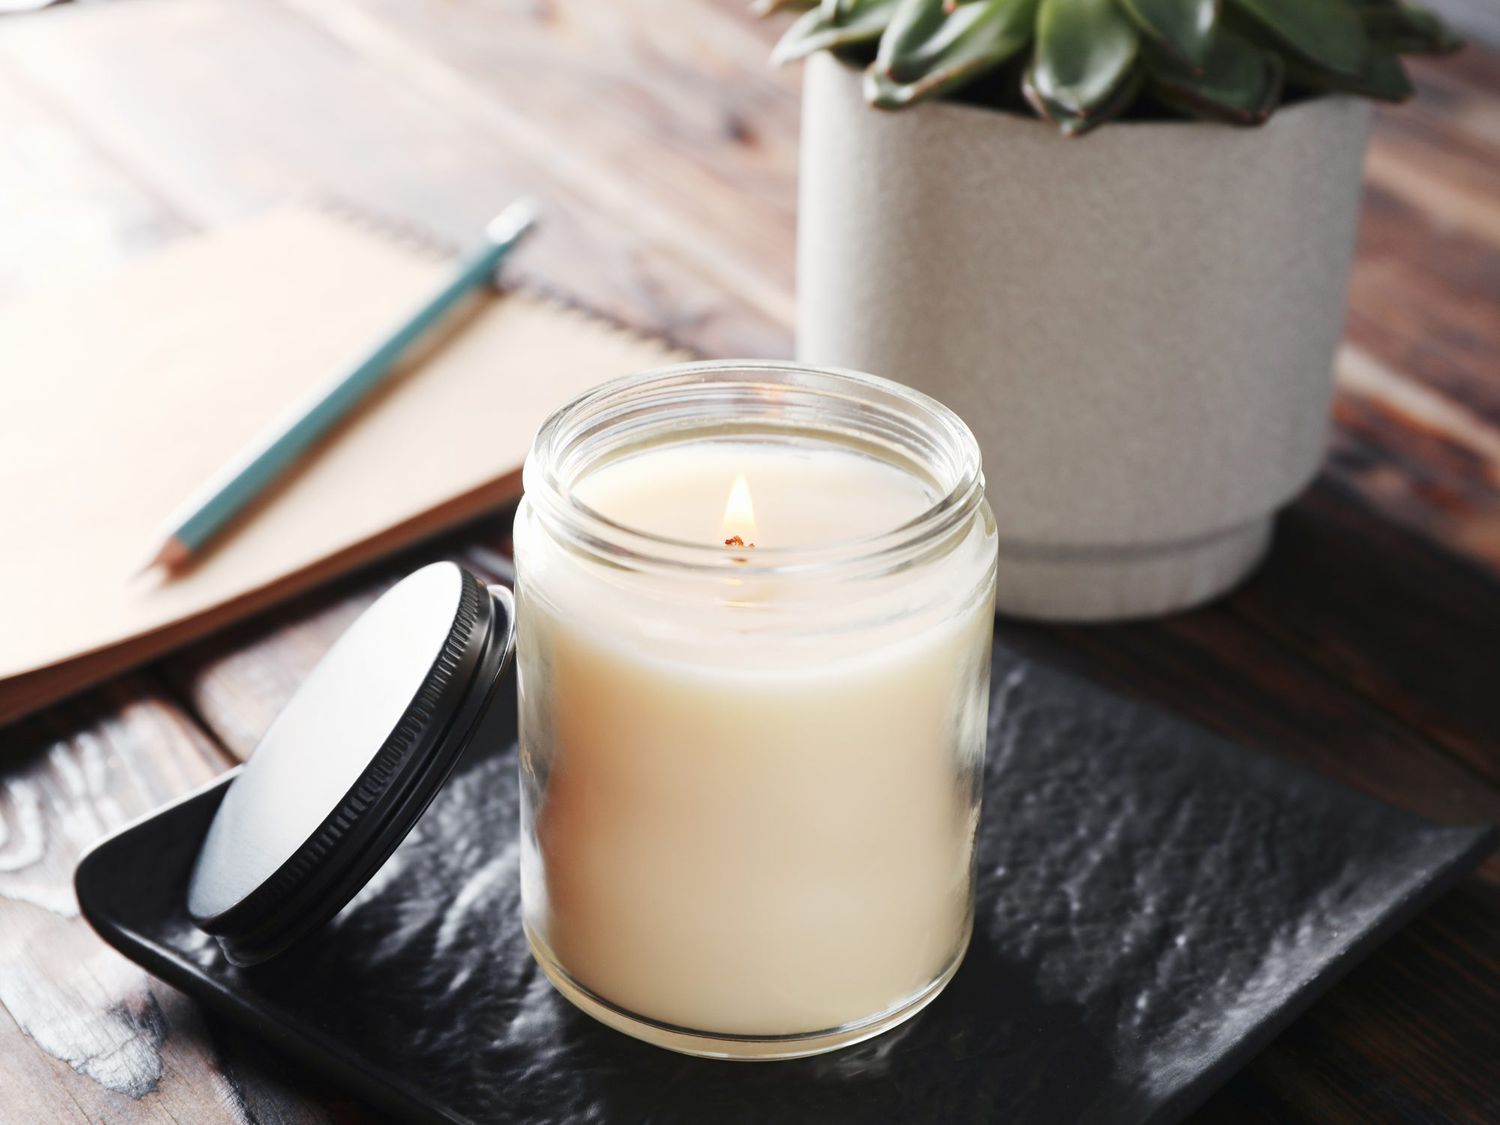 candle care tips: candle jar